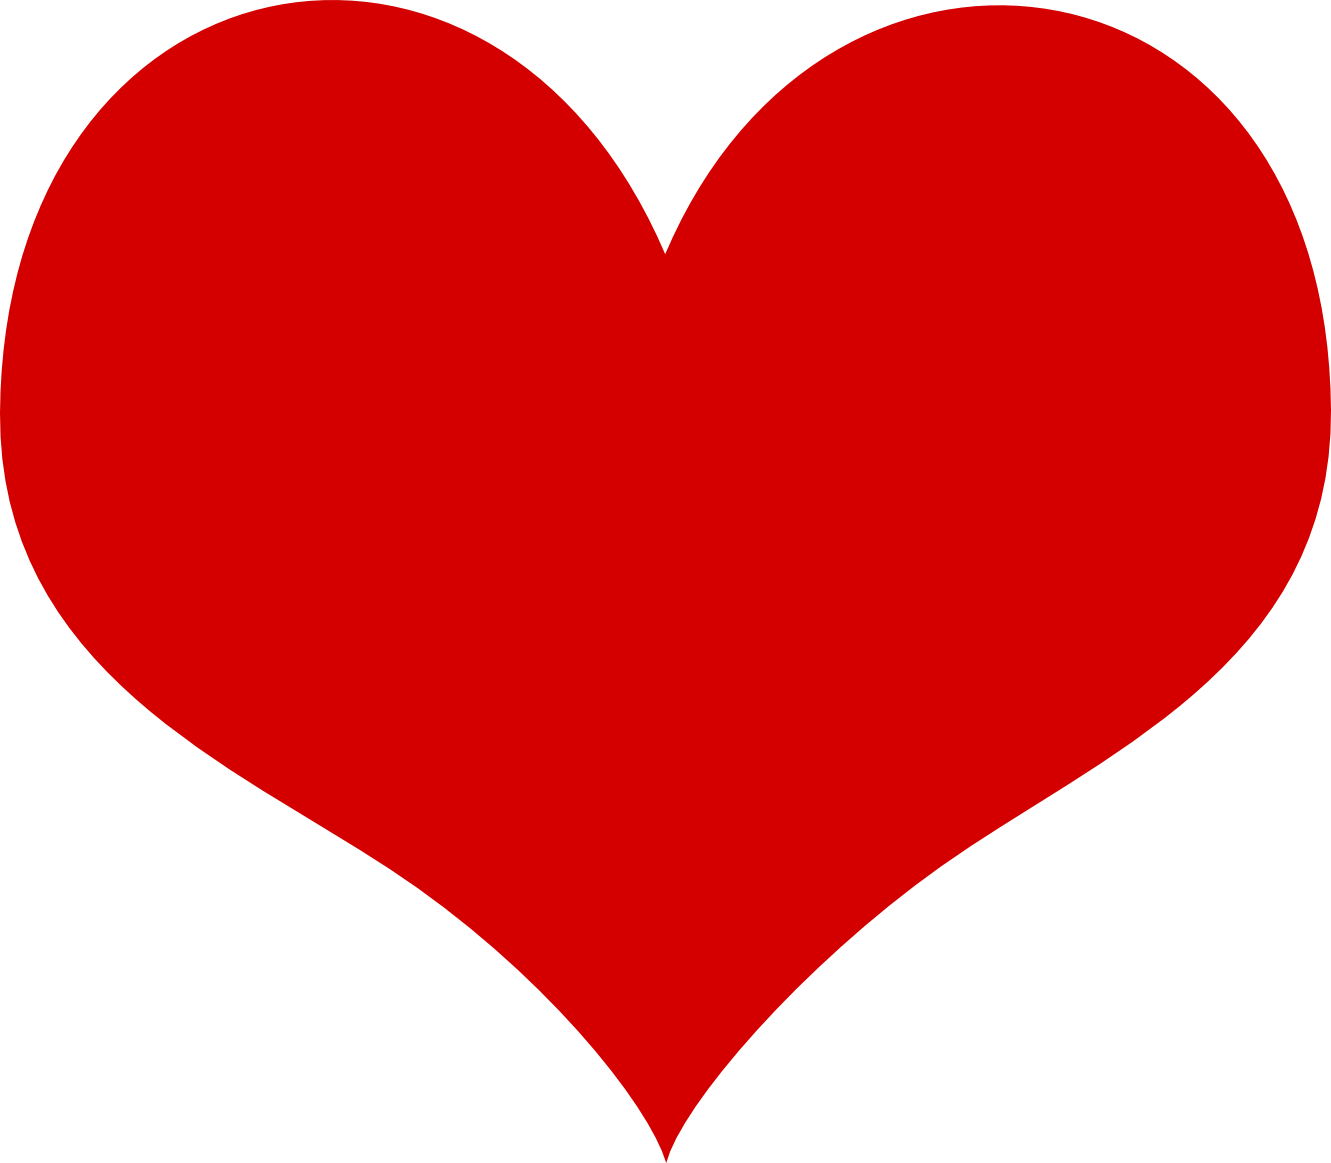 Red Heart Png Image, Free Download - Heart, Transparent background PNG HD thumbnail